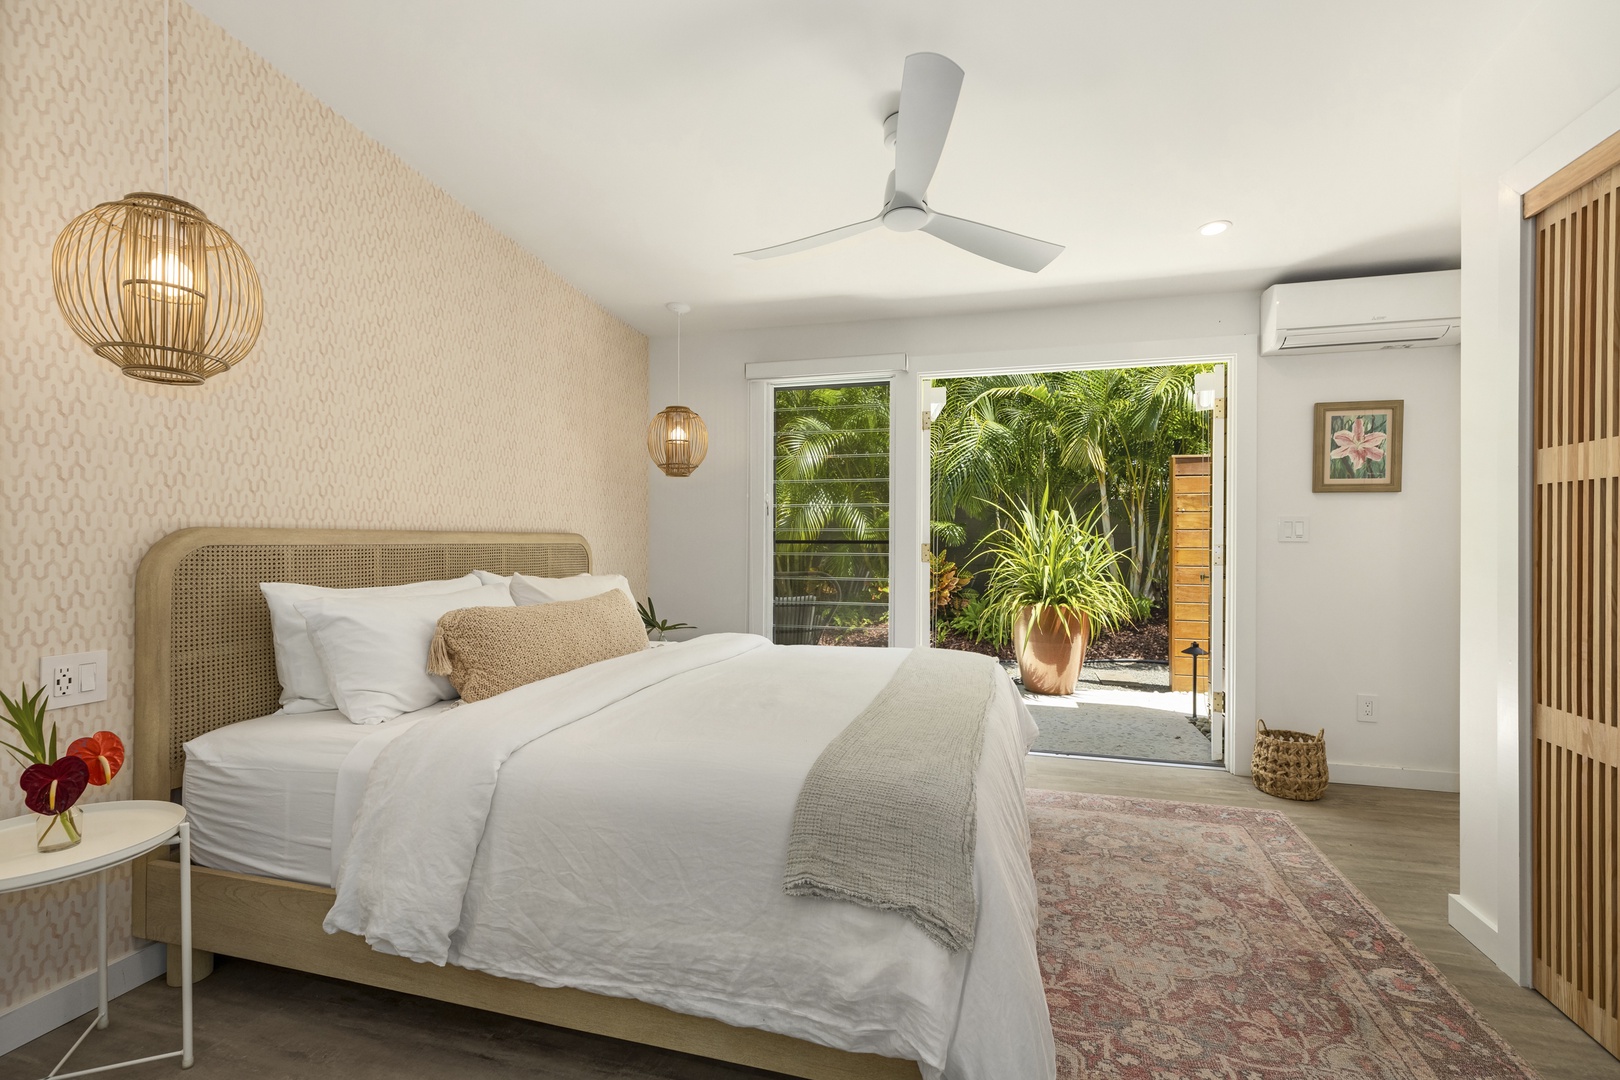 Kailua Vacation Rentals, Lanikai Hideaway - Primary suite with luxurious appointments, open to patio and ensuite